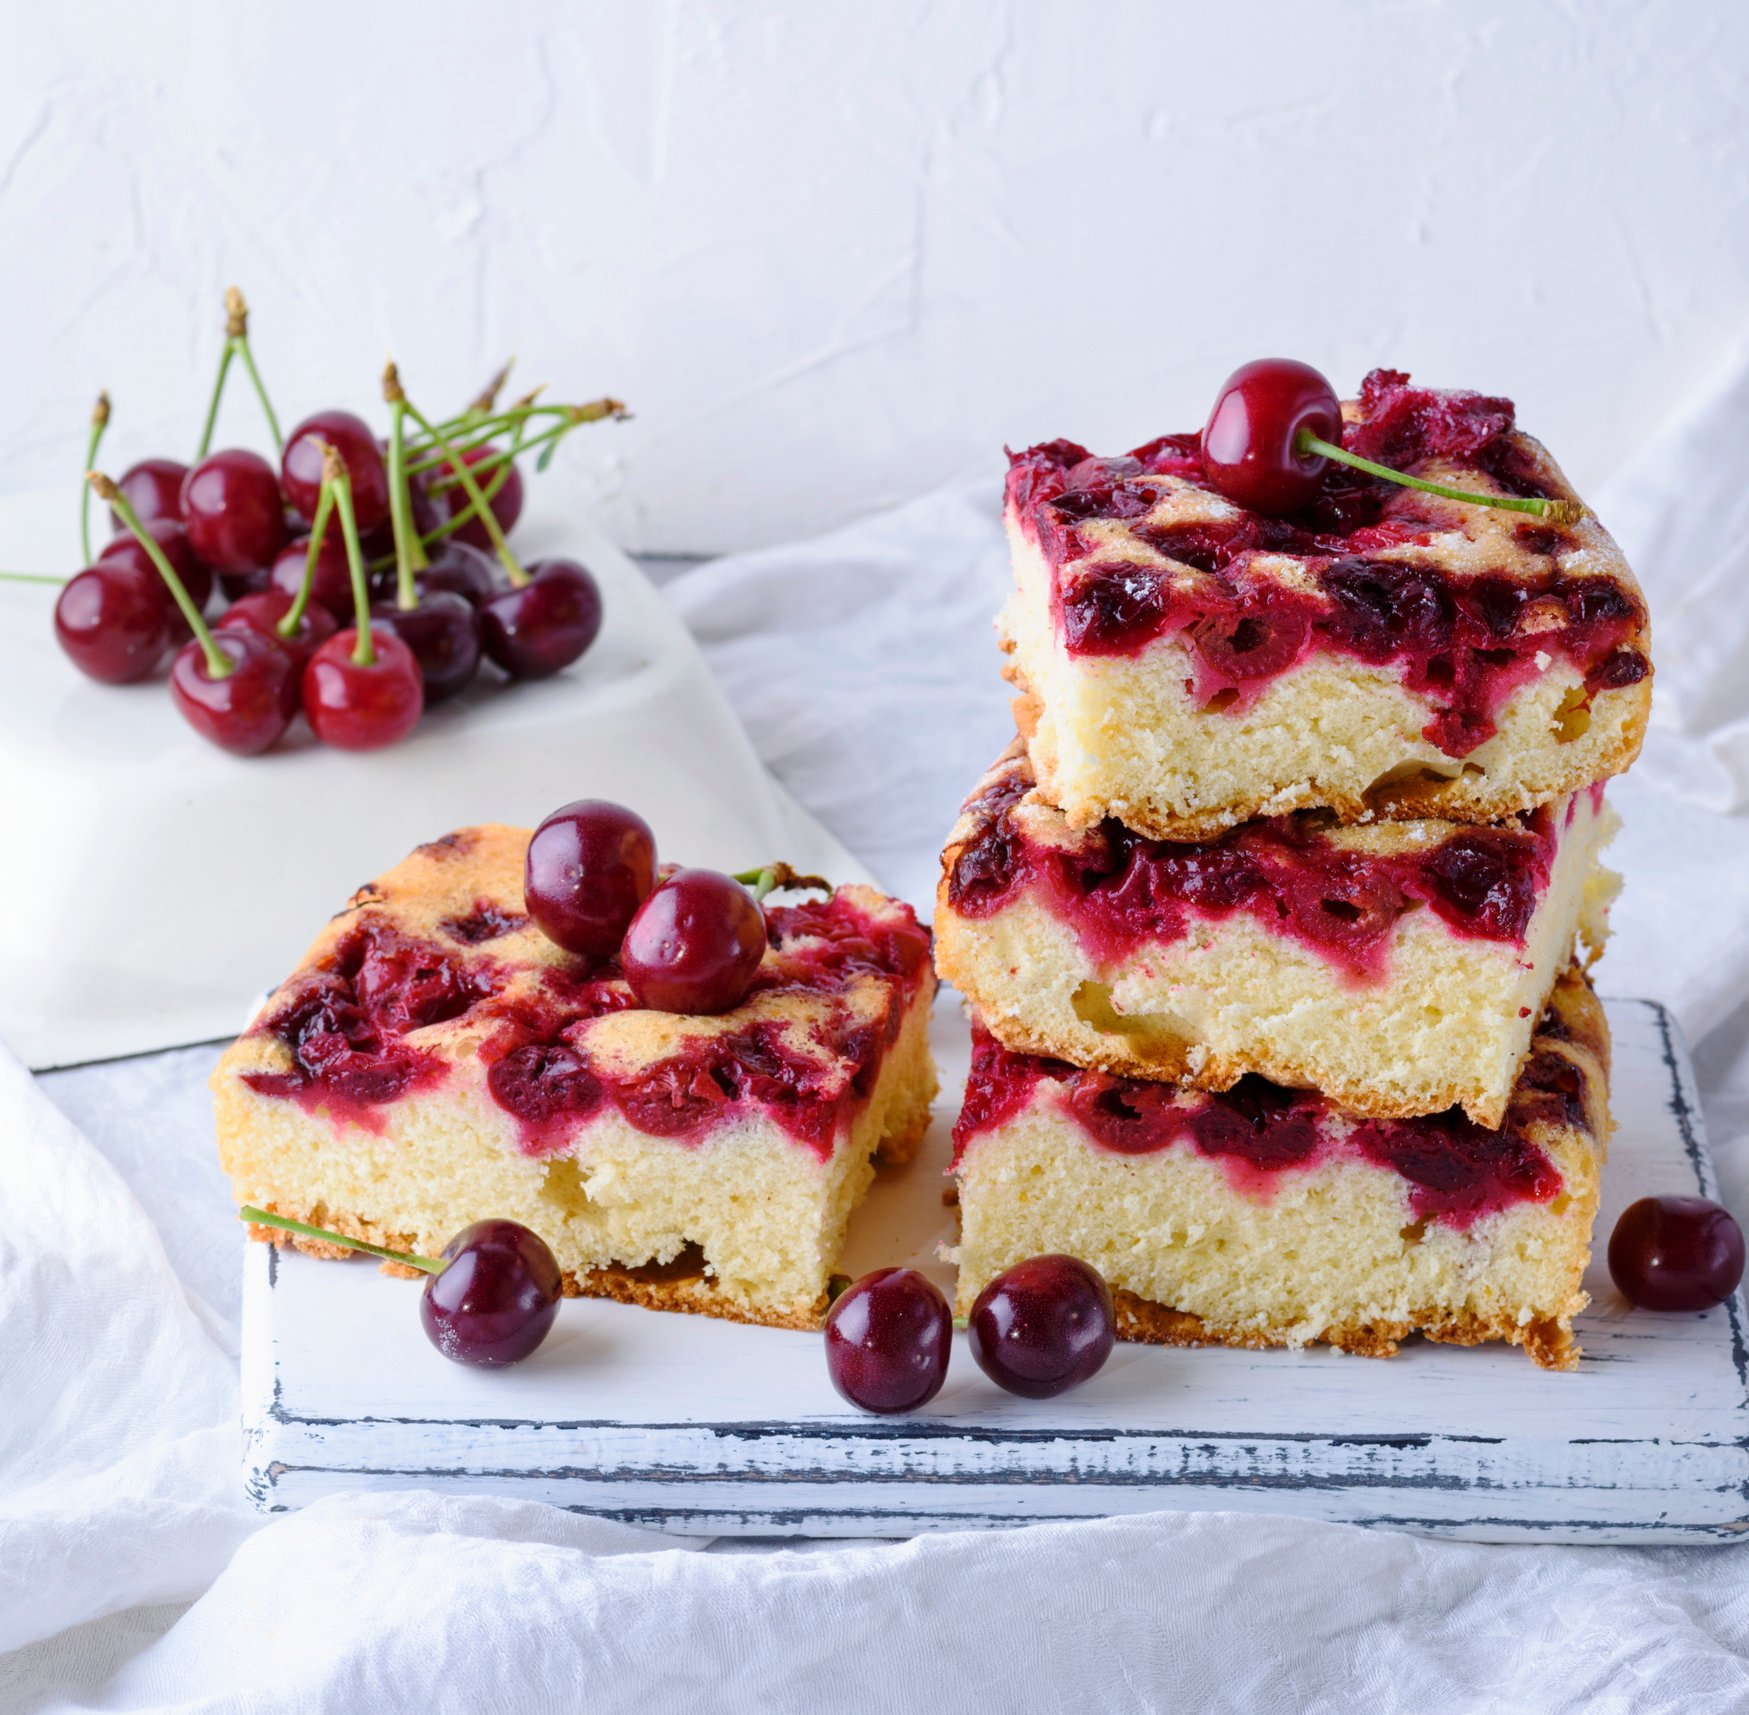 Cut your cherry cake into squares for easier storage. (iStock Photo)